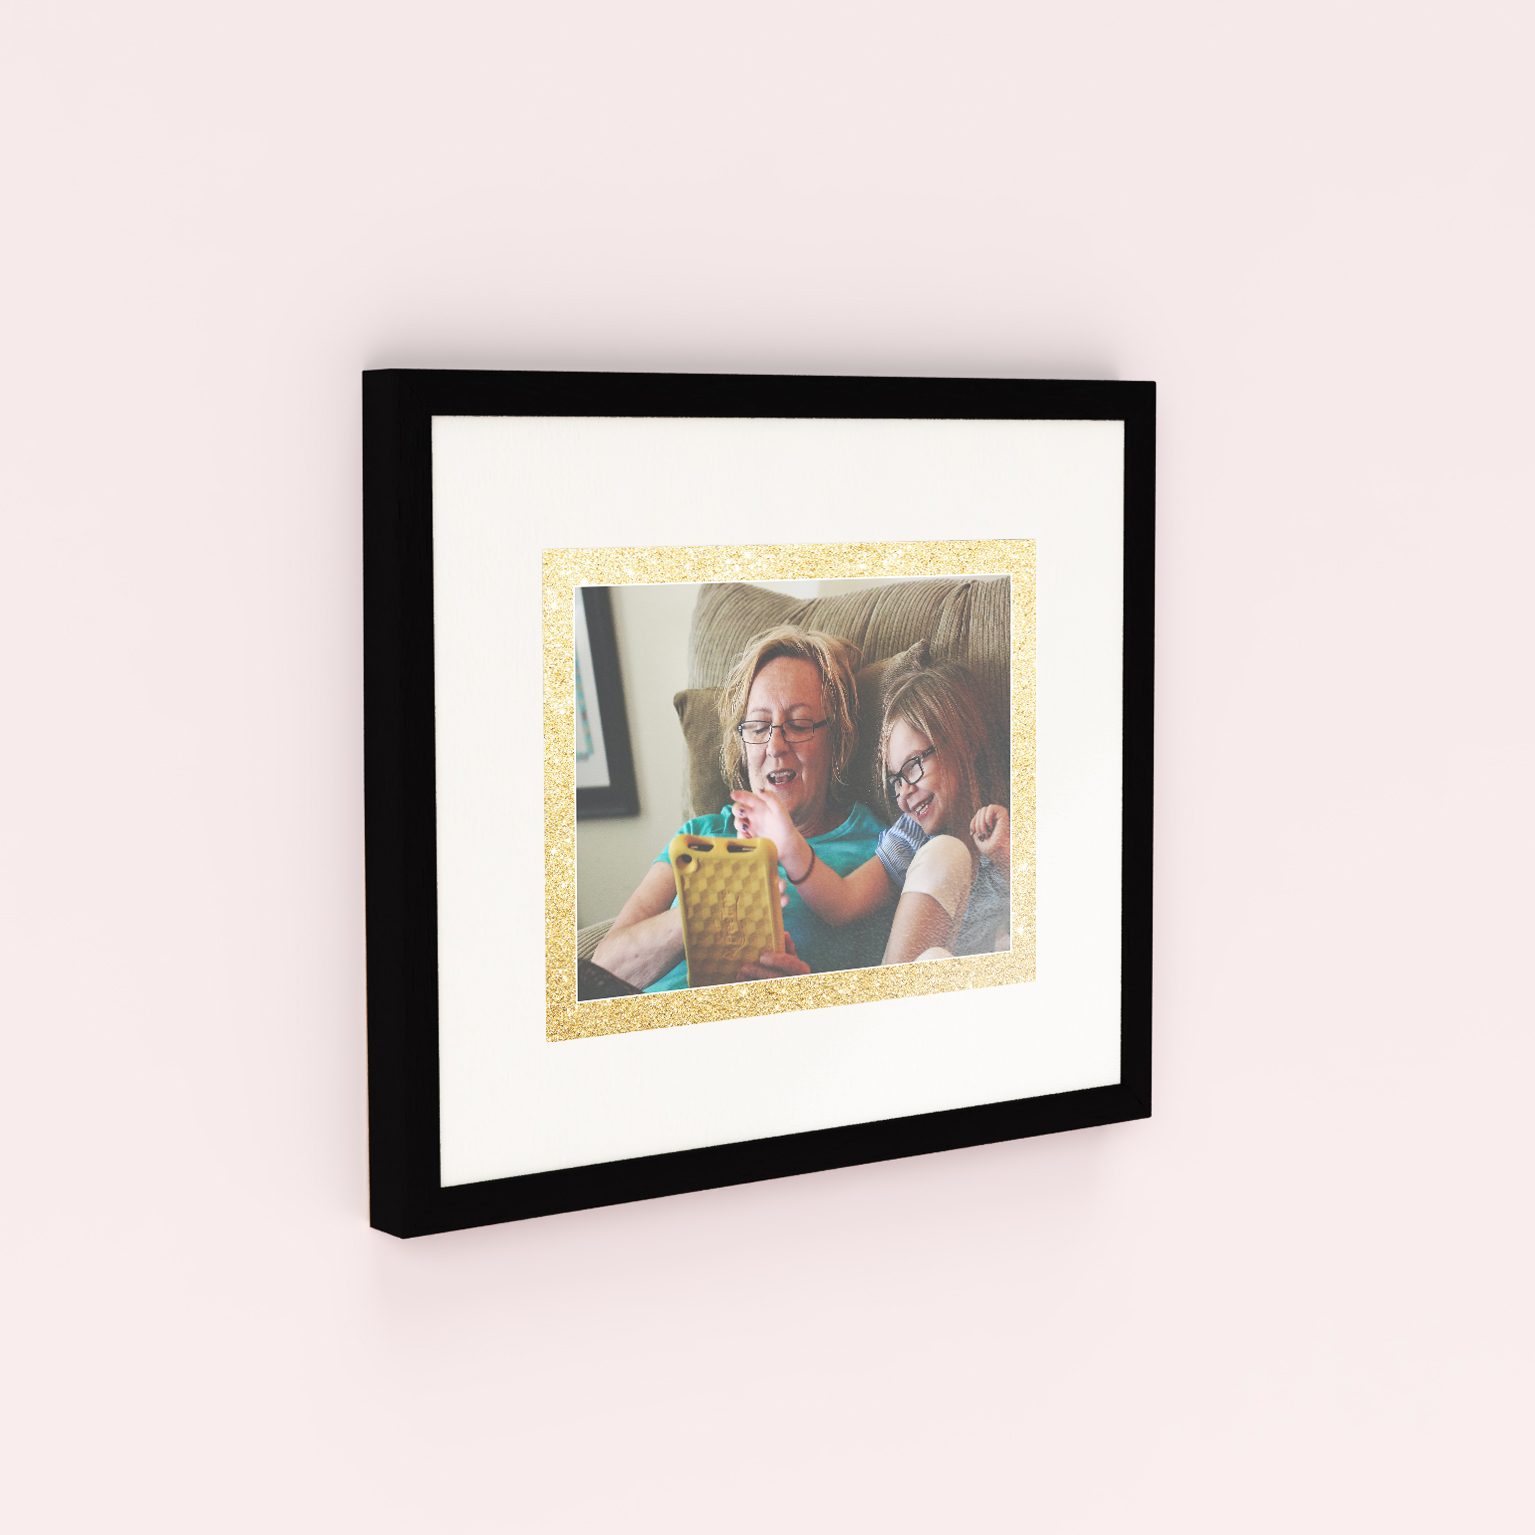 Sparkles Personalised Framed Photo Print - Capture Joyful Moments with this Cream-Framed Design